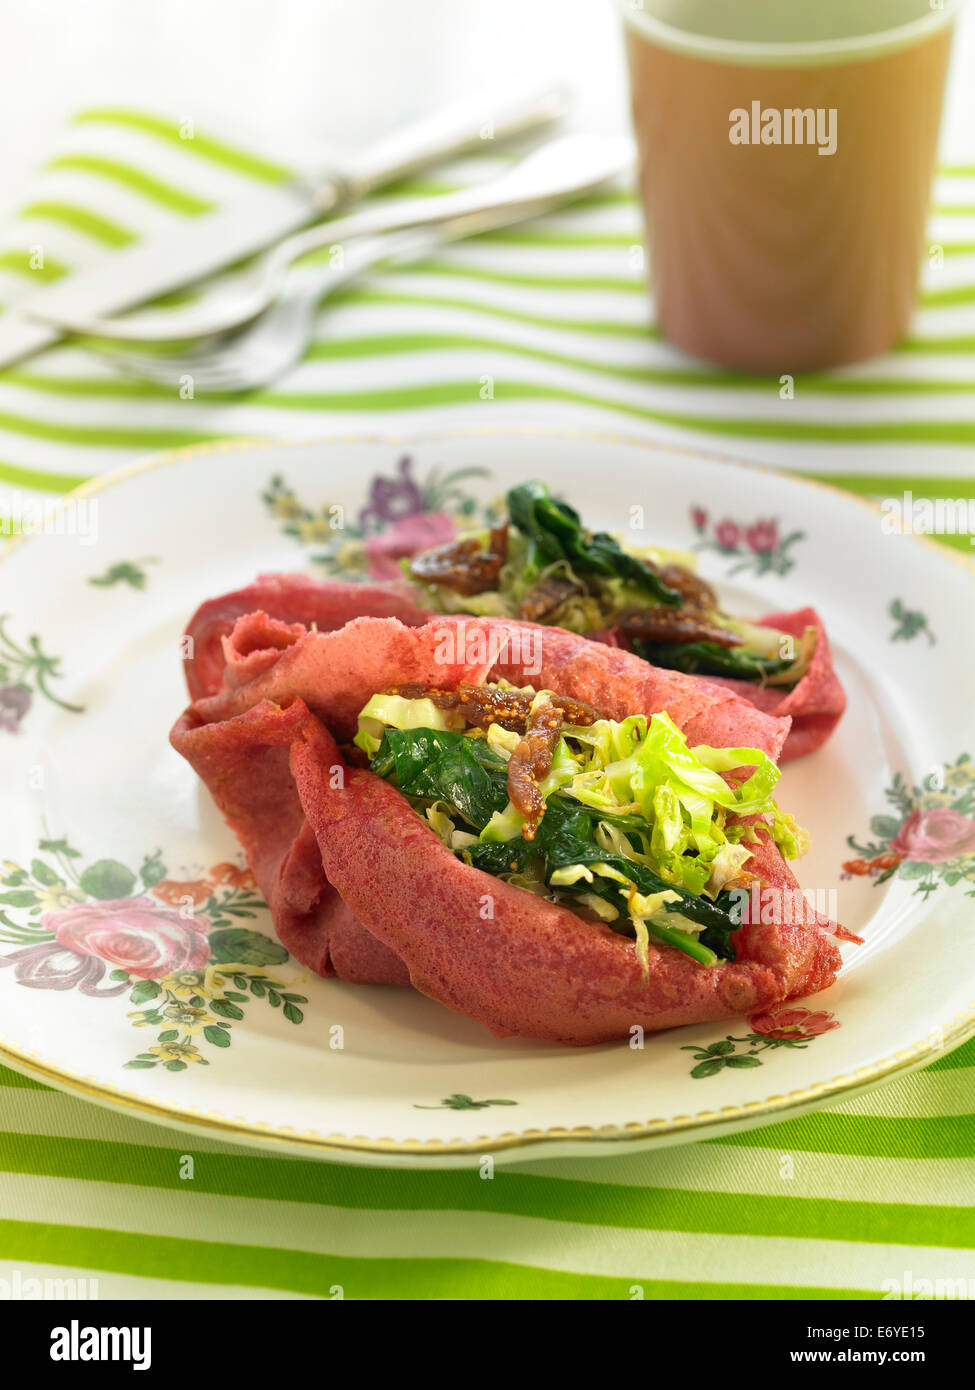 Beetroot crepe with vegetables Stock Photo